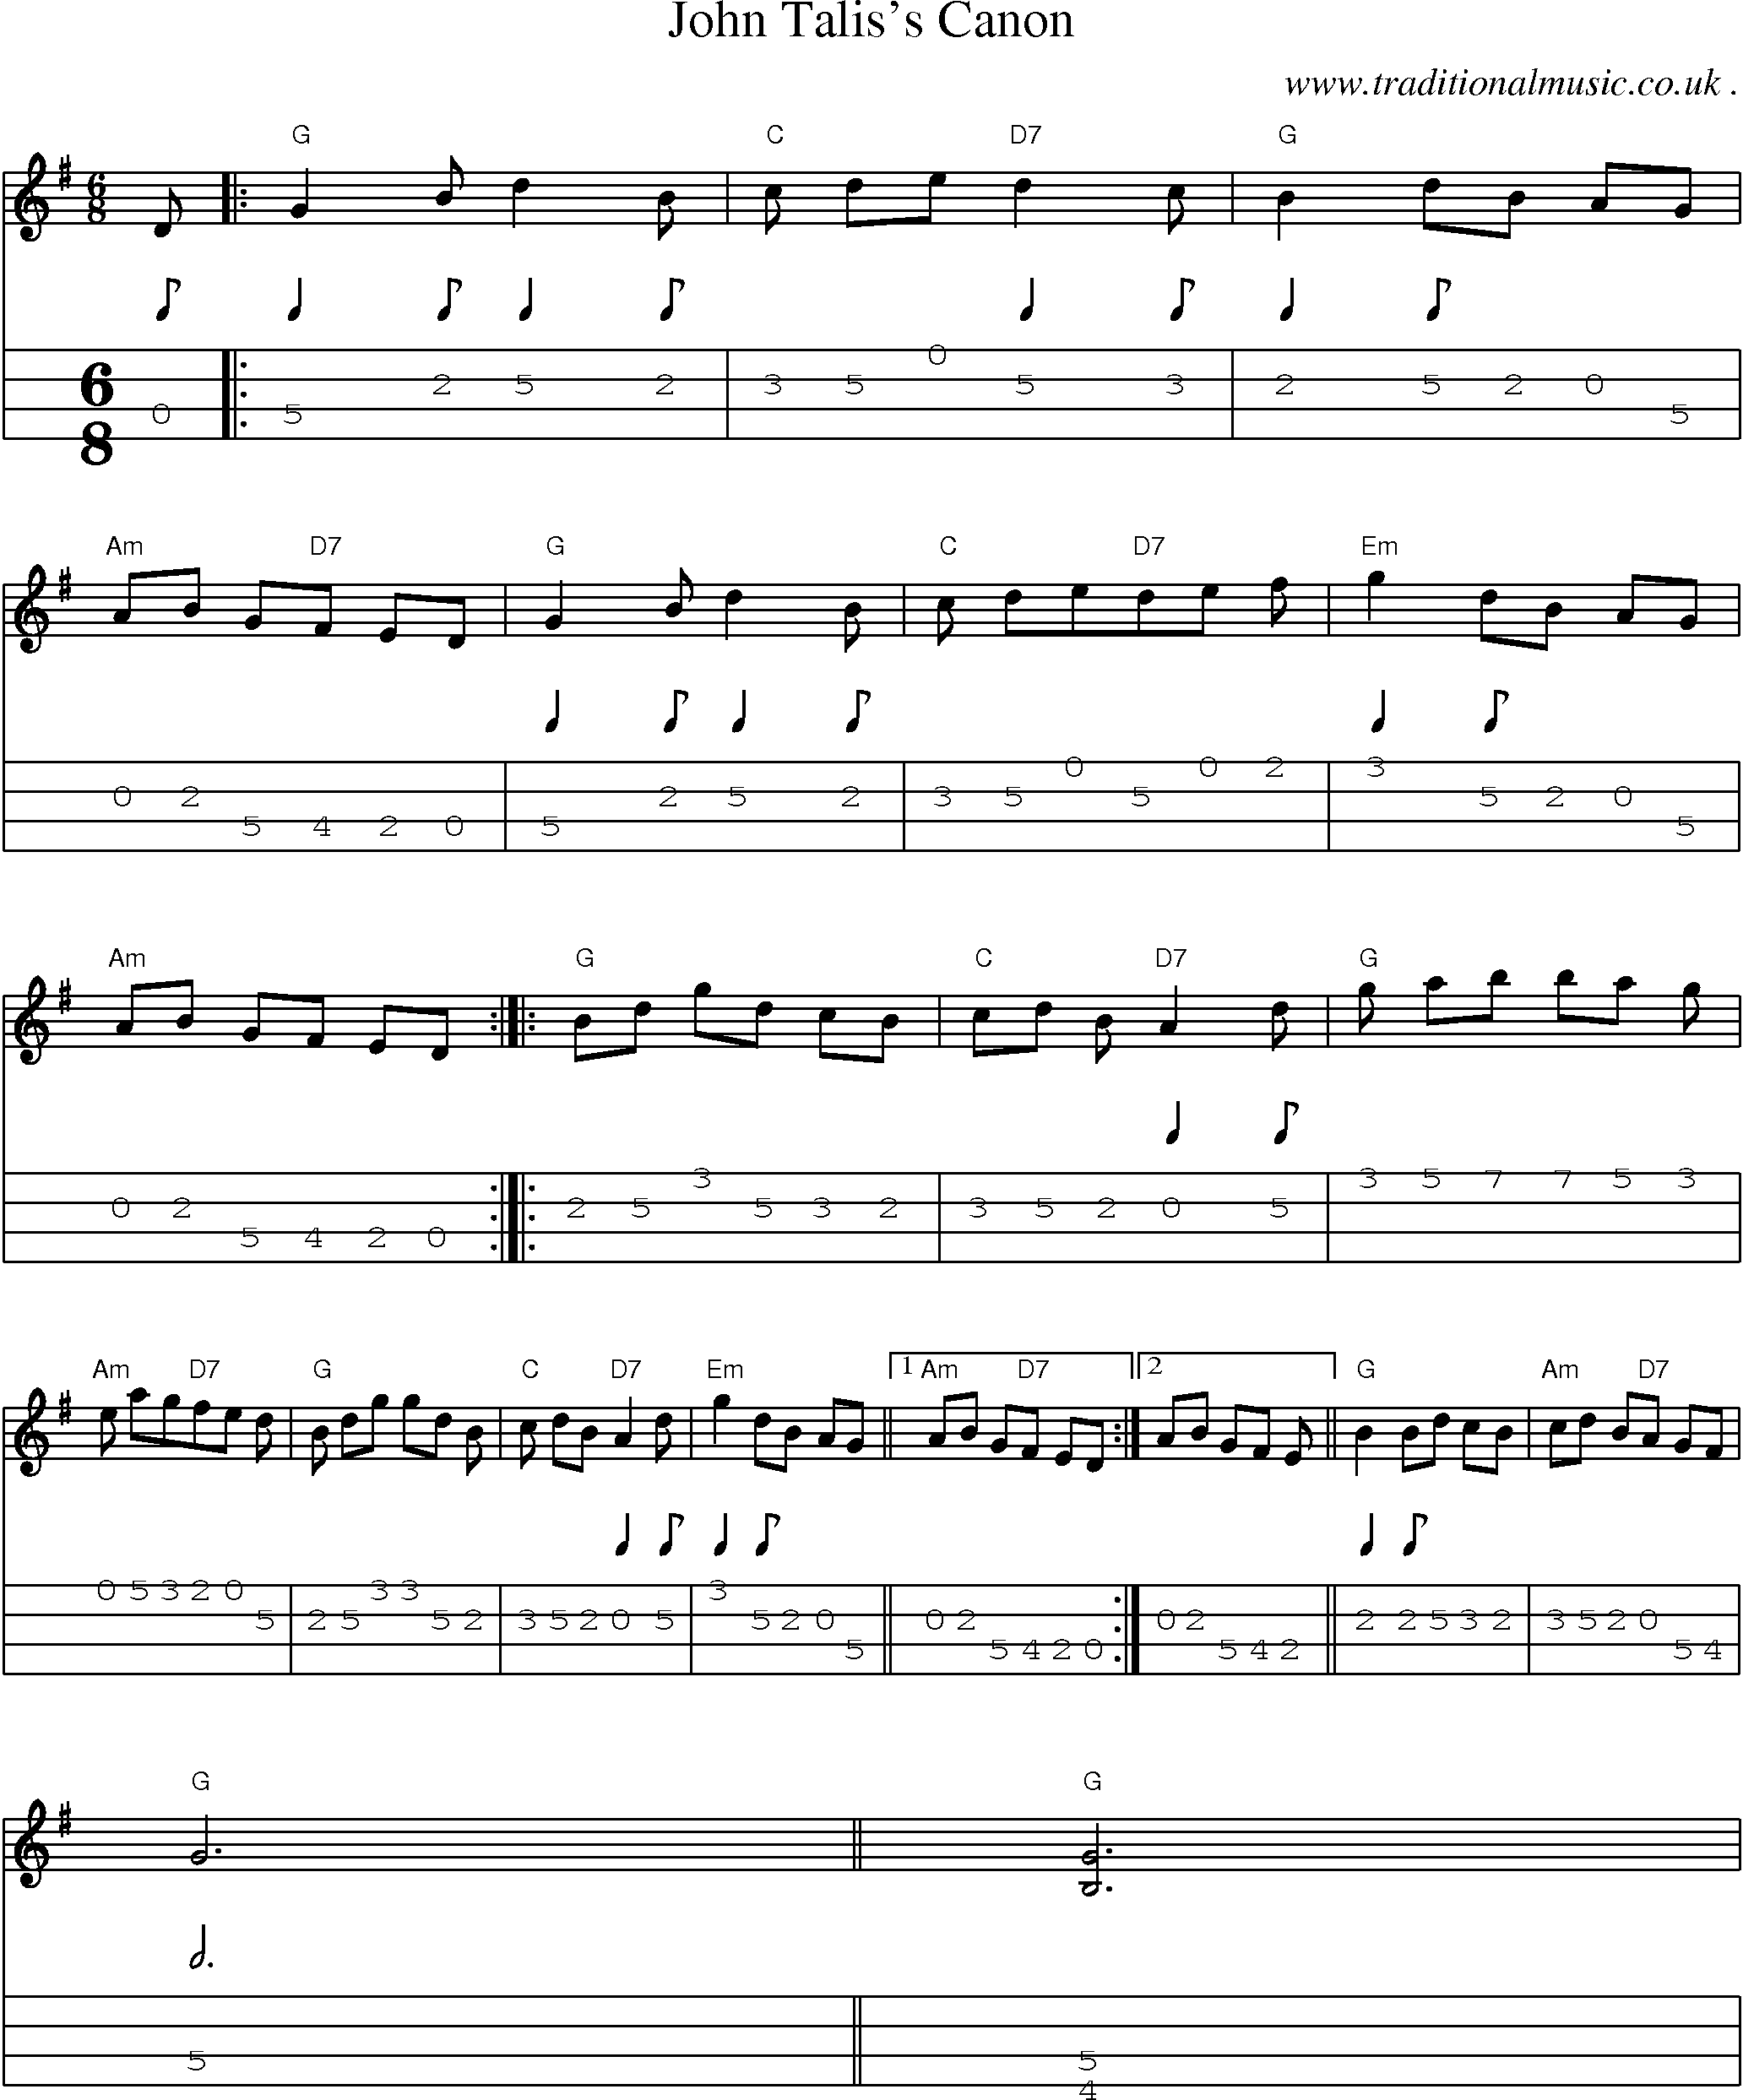 Sheet-Music and Mandolin Tabs for John Taliss Canon